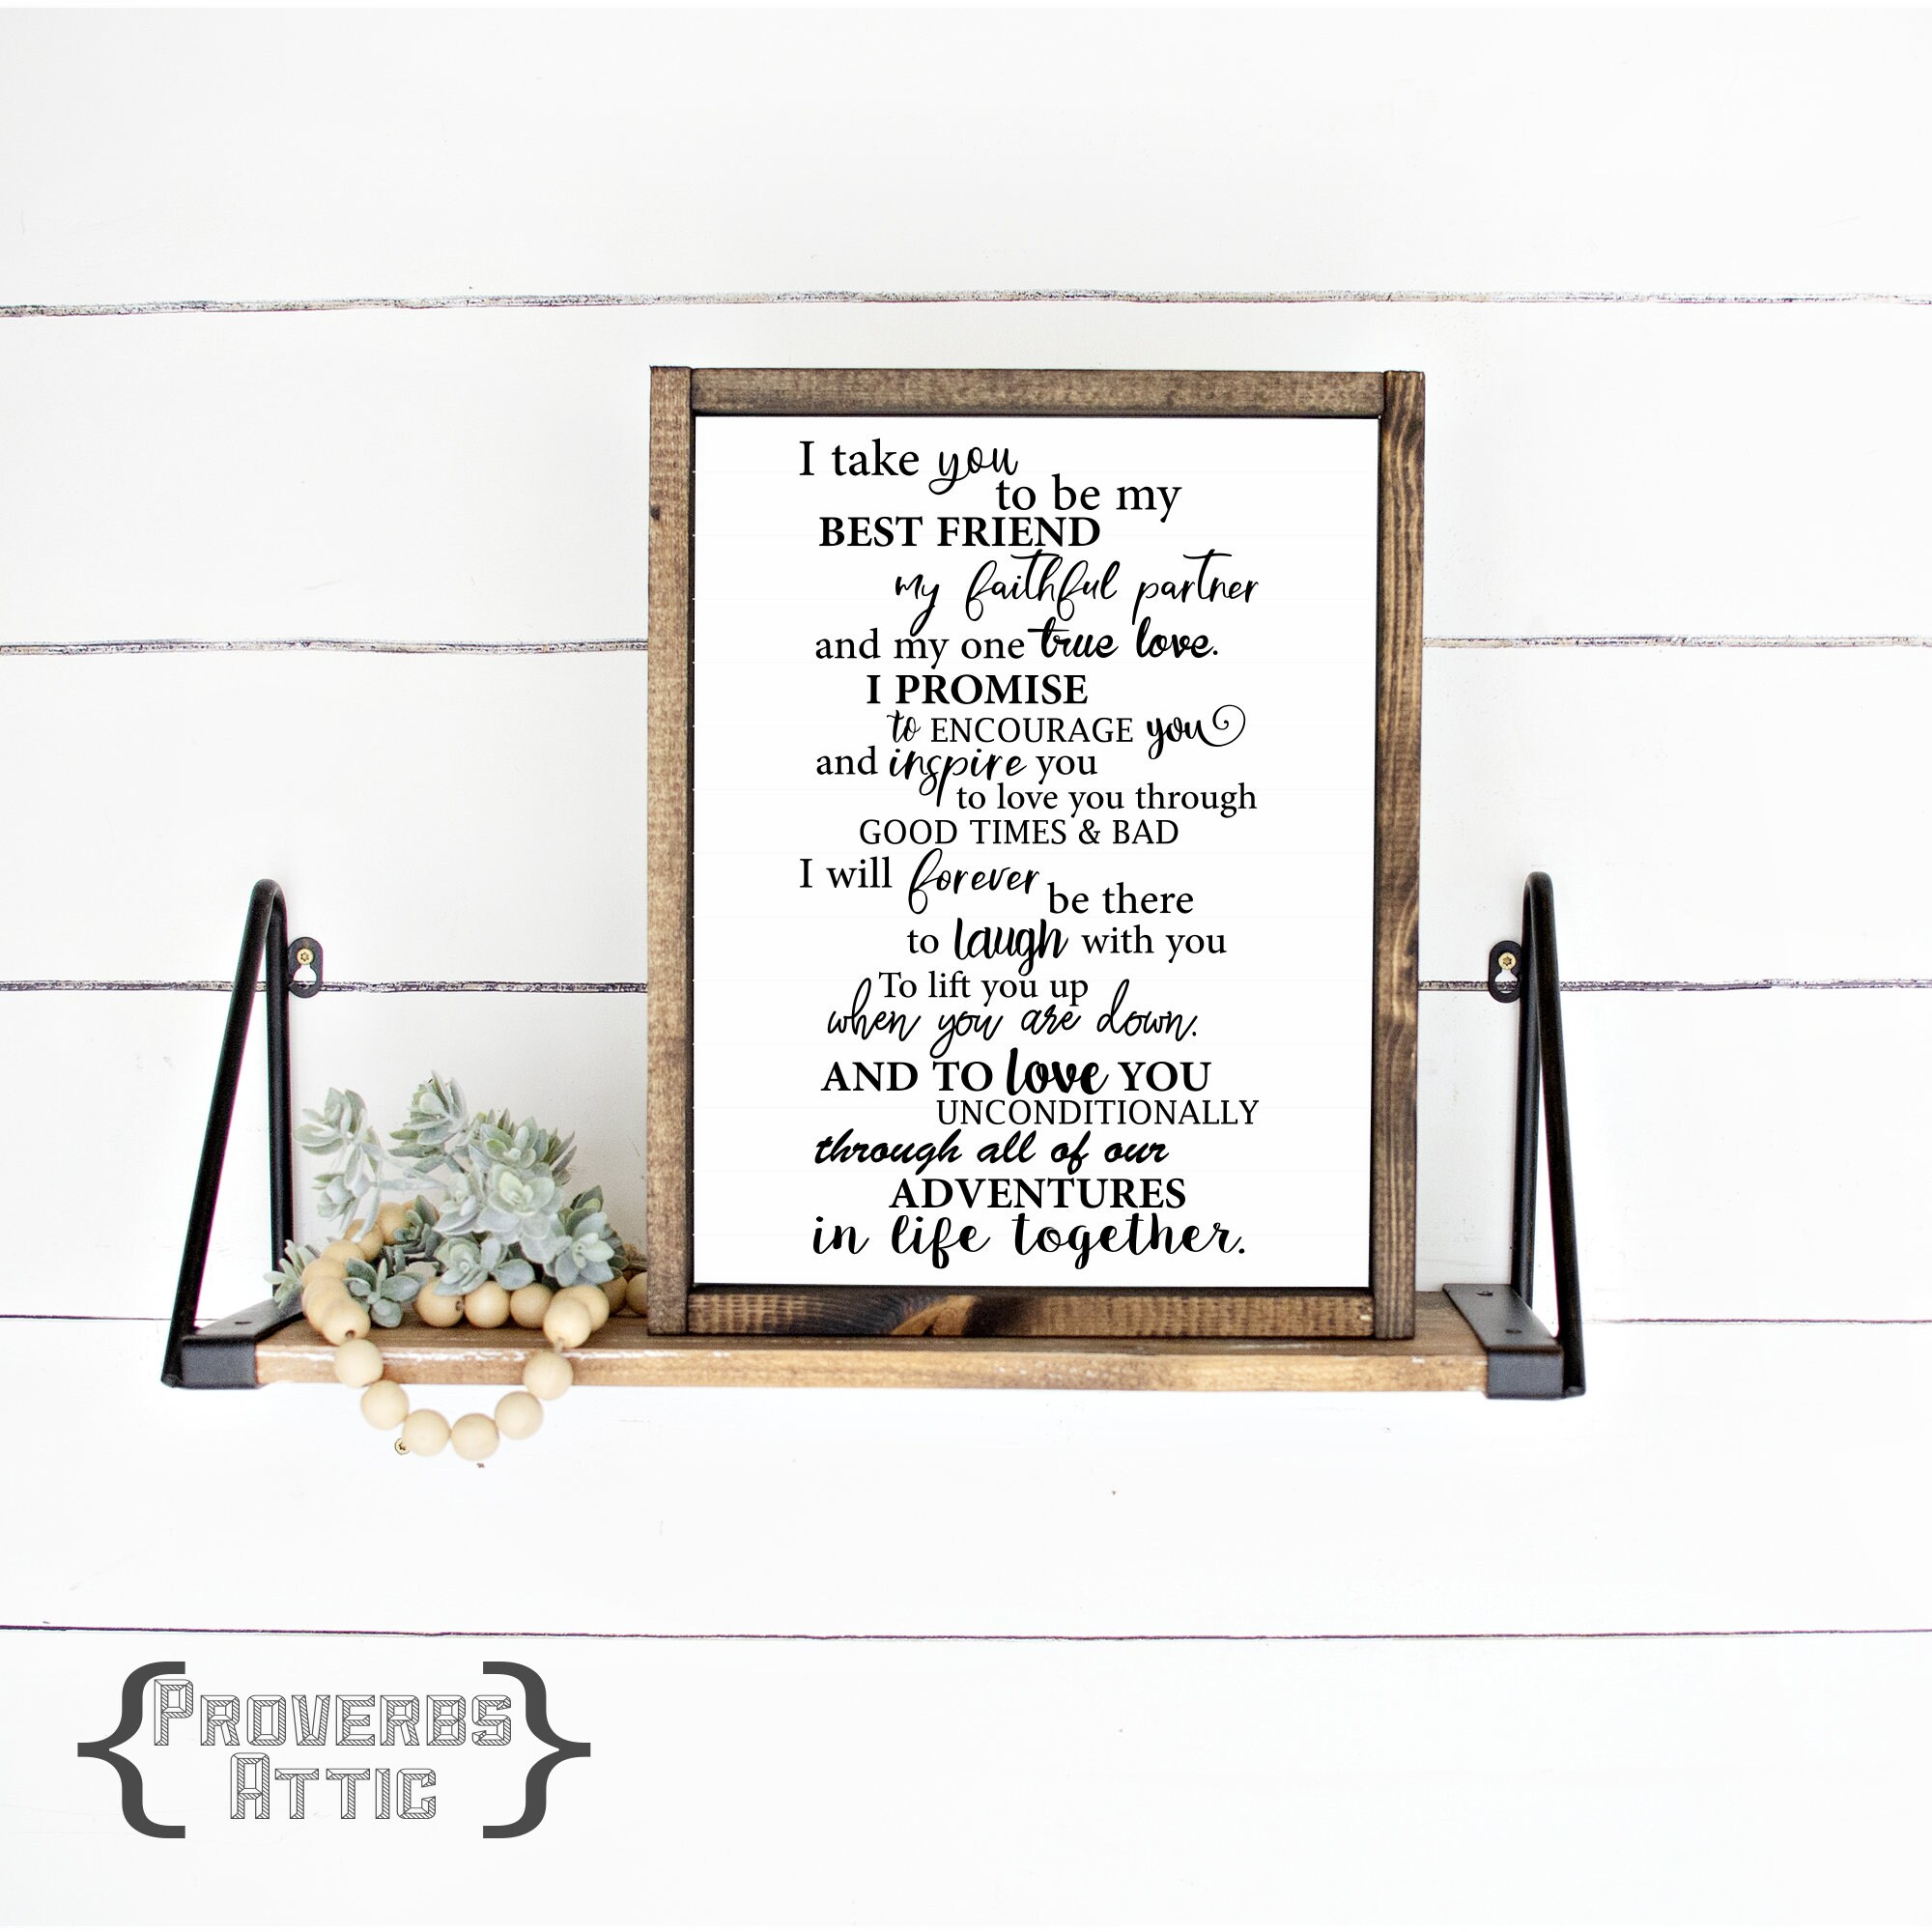 I Take You to Be My Best Friend DIGITAL Quote (Instant Download